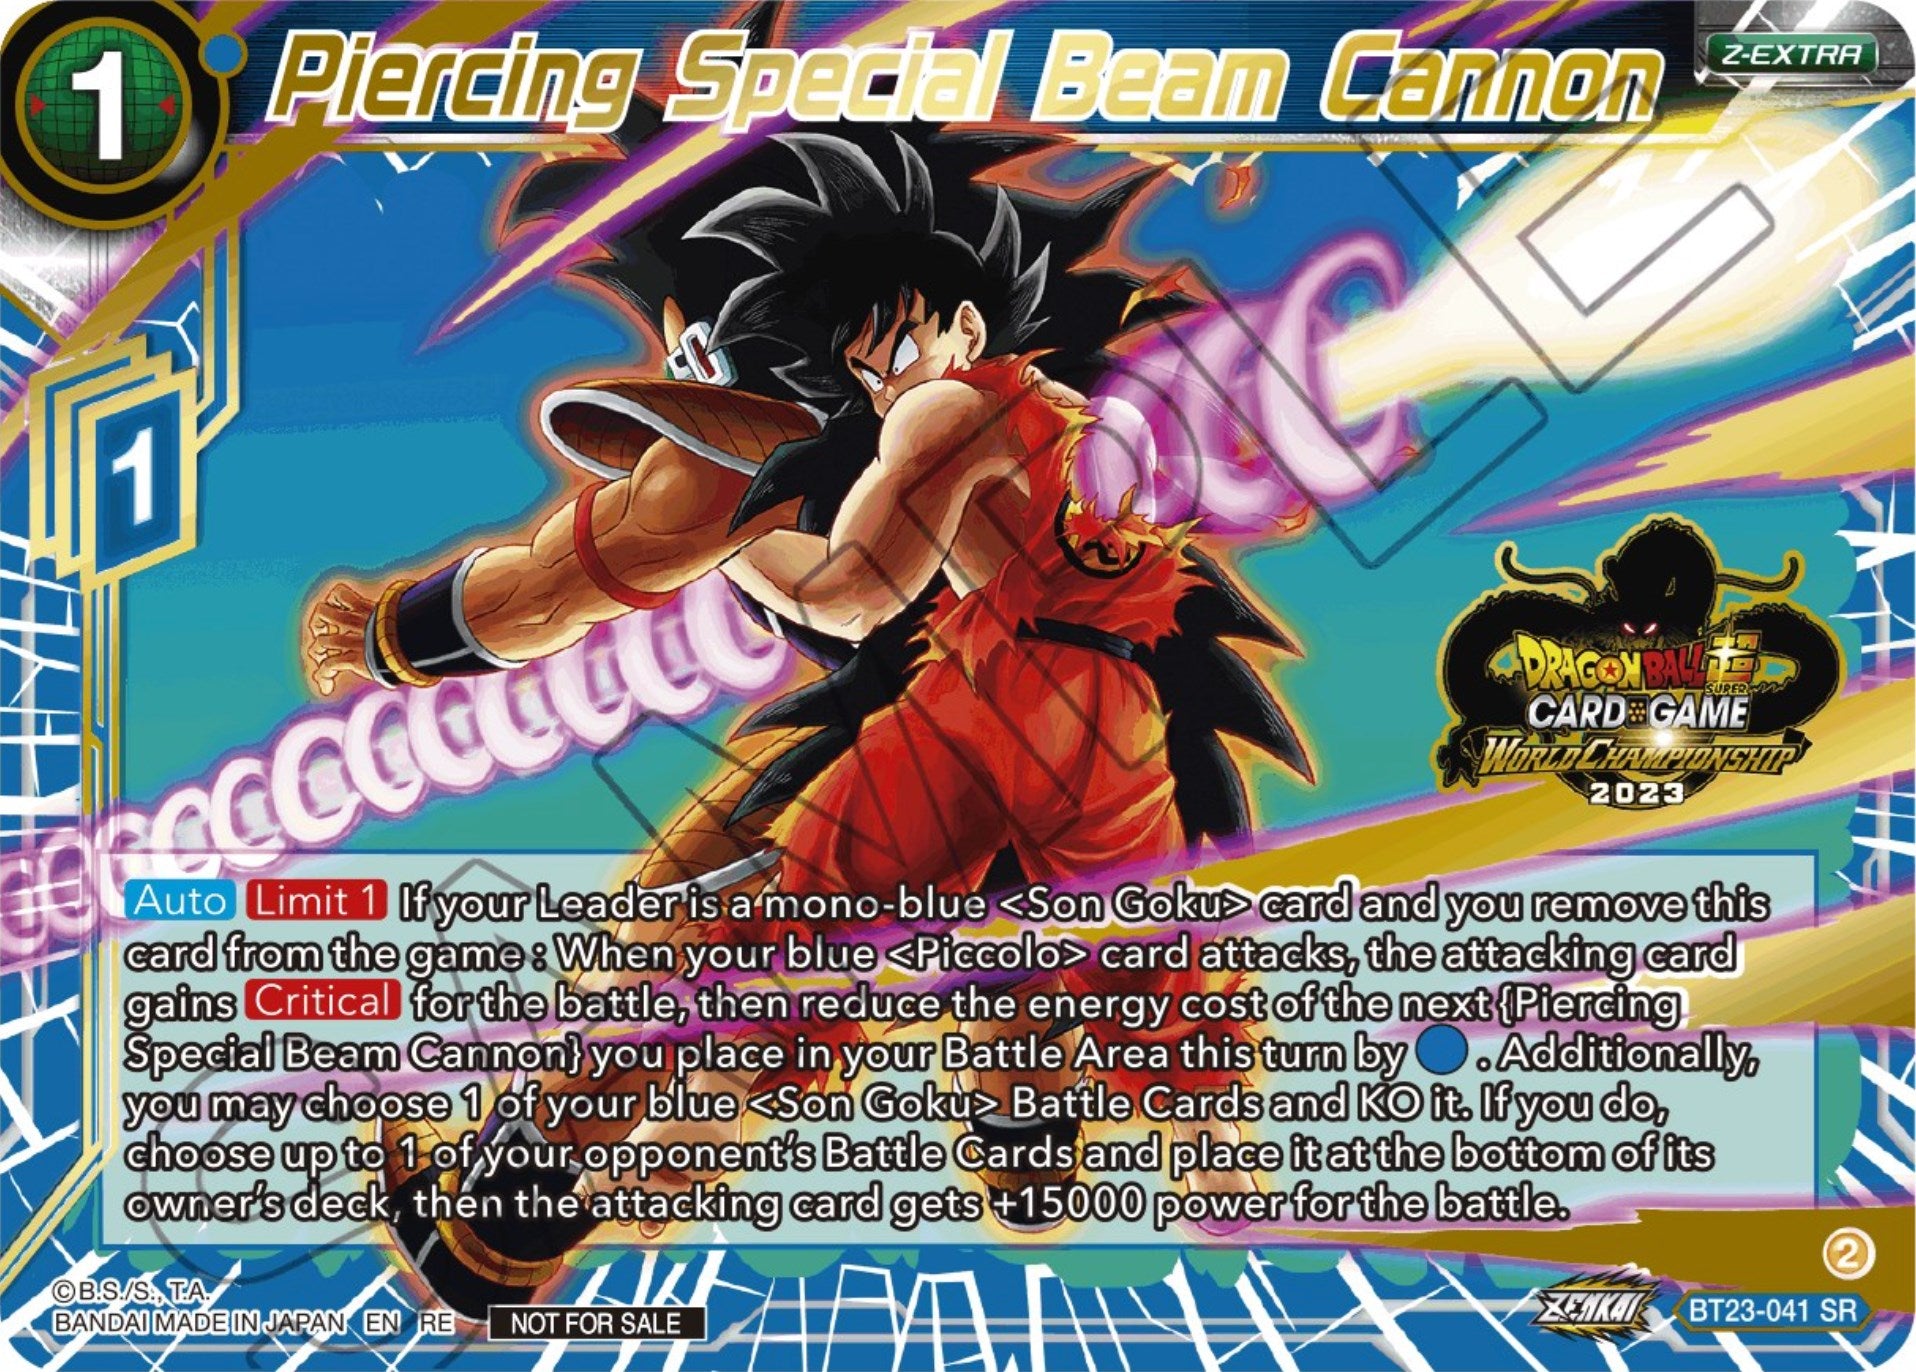 Piercing Special Beam Cannon (2023 World Championship Z-Extra Card Set) (BT23-041) [Tournament Promotion Cards] | Pegasus Games WI